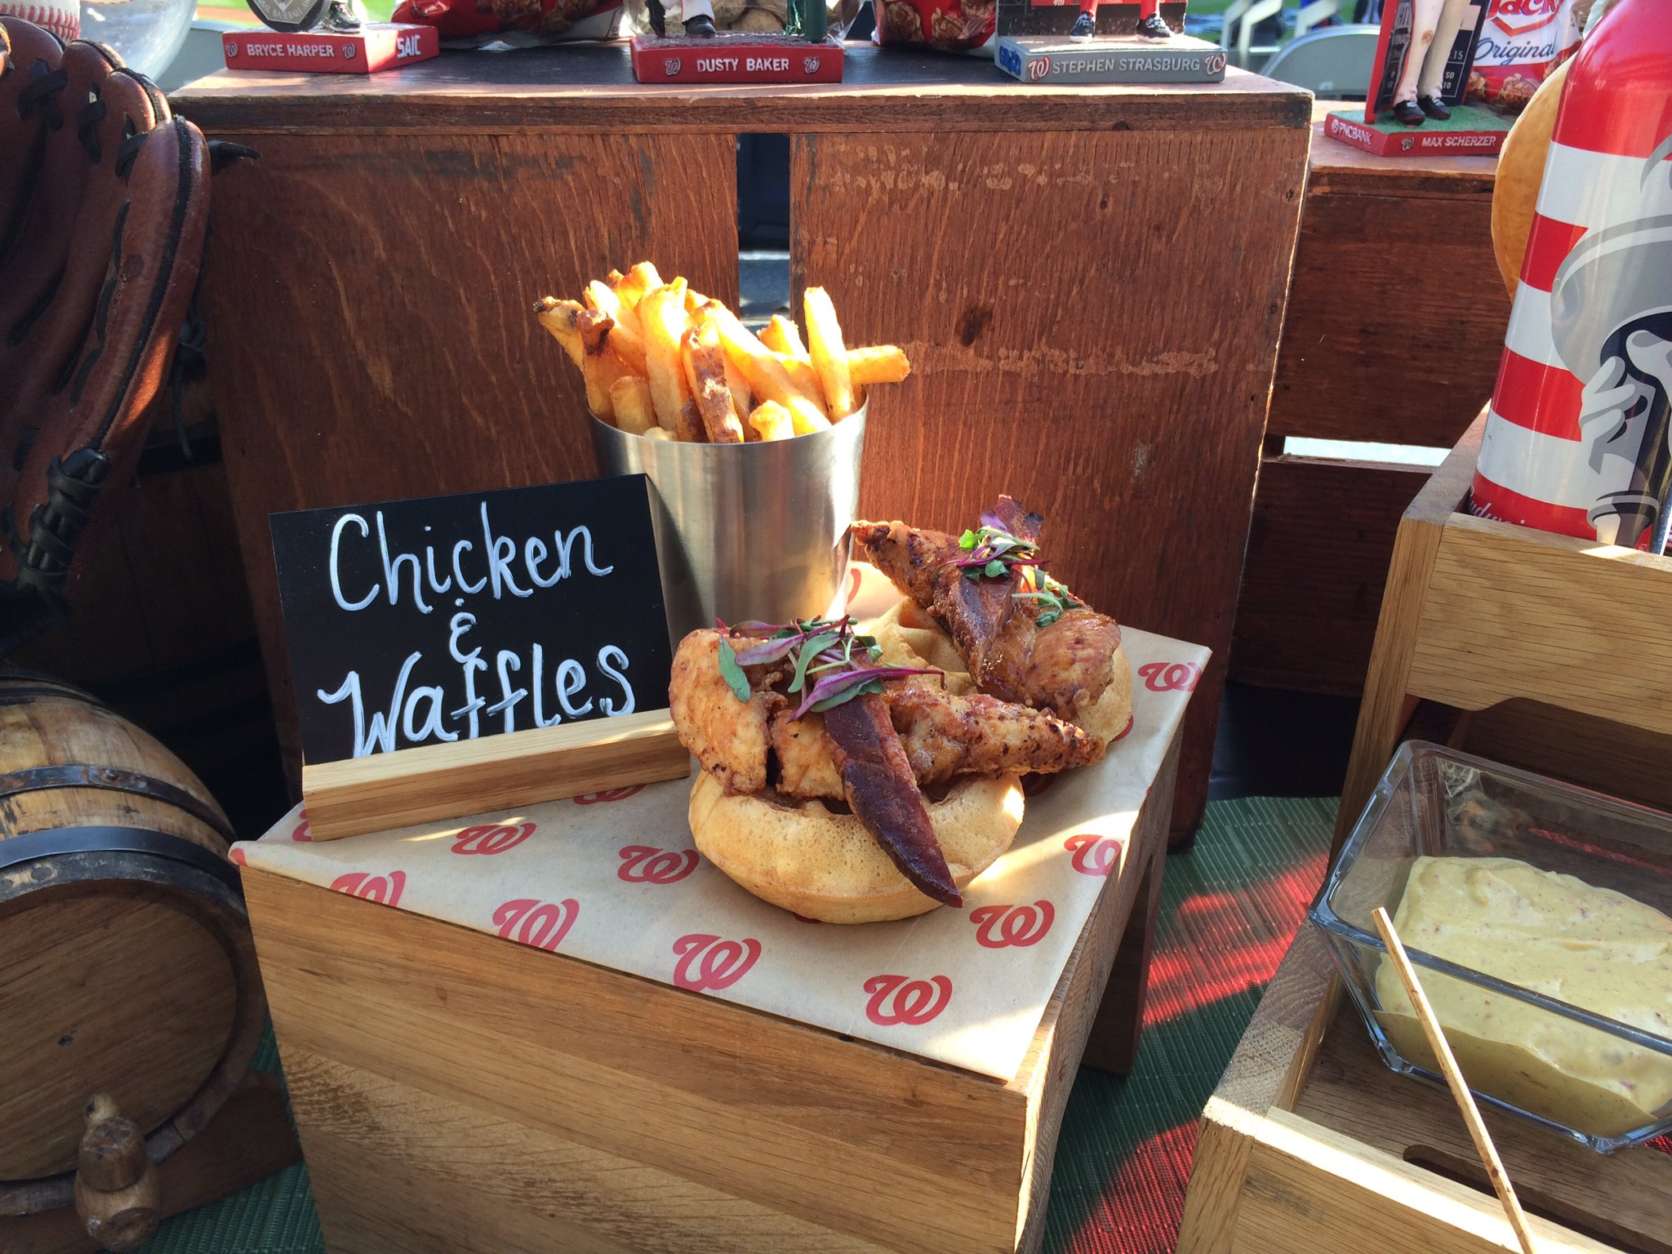 The new concession offerings at Nationals Park includes chicken and waffles. (WTOP/Nick Iannelli)